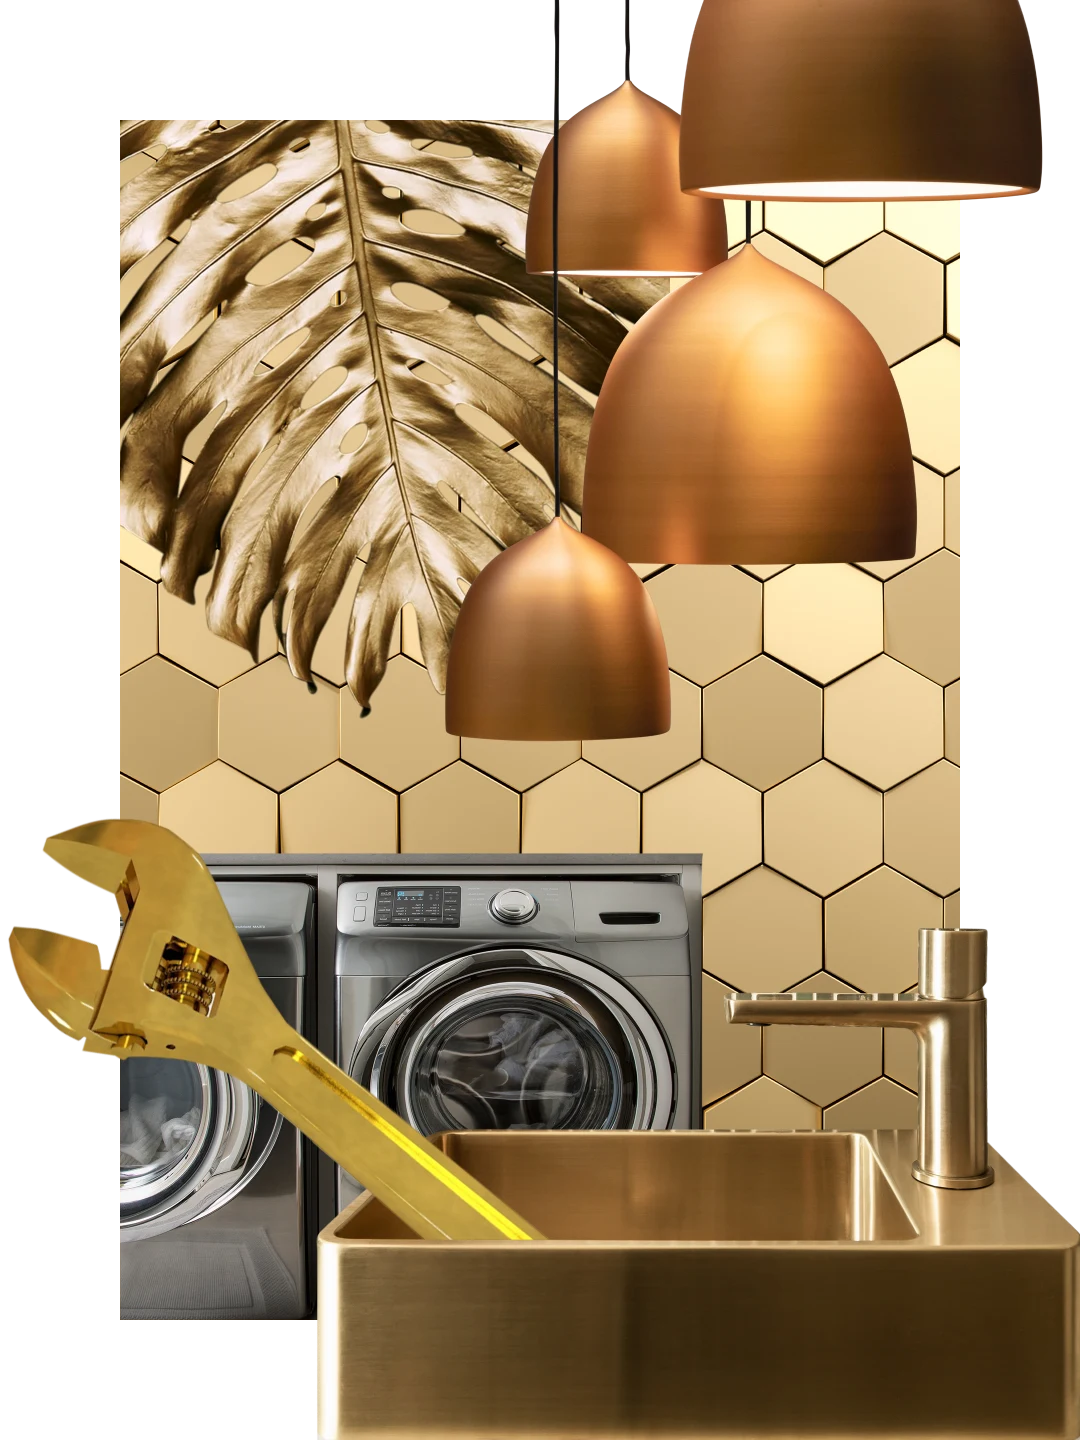 Collage of household items in golden hues. Lamps of different sizes hang down from the top, in front of large leaf tendrils. A washing machine and dryer are behind a large gold wrench in a golden sink. A wall with honeycomb-shaped tiles is in the background. 
